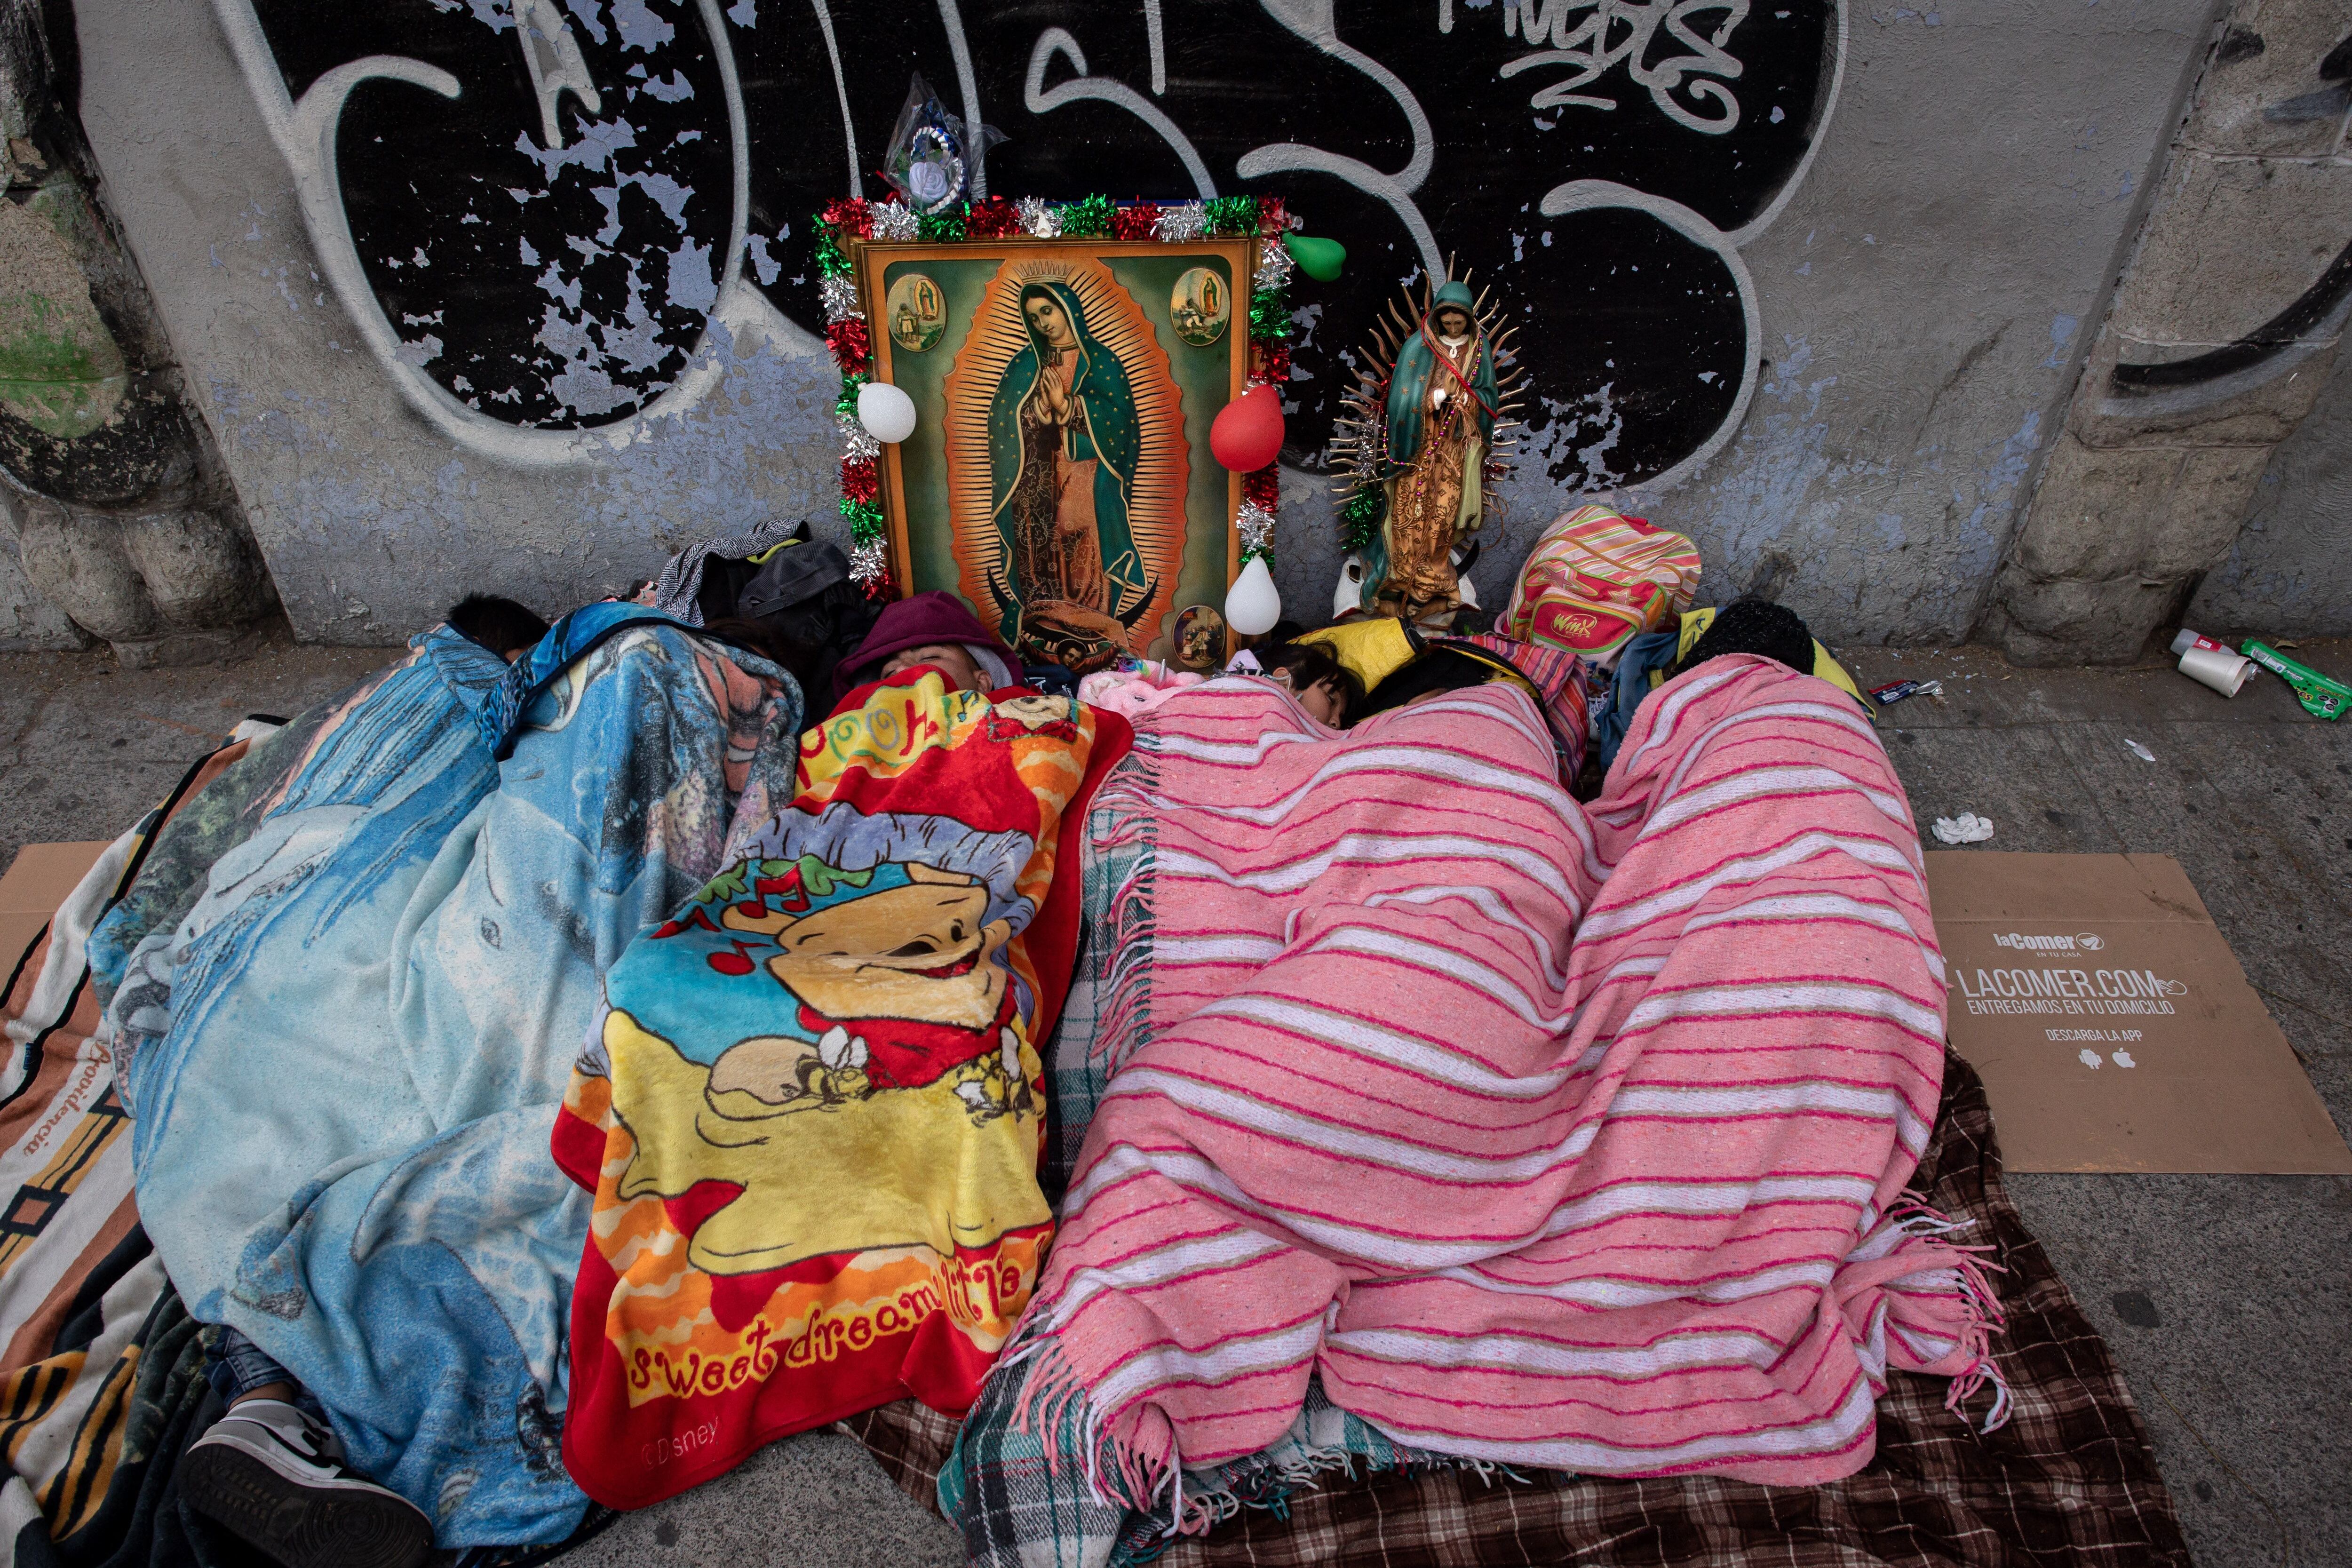 Pilgrims sleep in the street next to an image of the Virgin of Guadalupe outside the Basilica of Guadalupe in Mexico City.